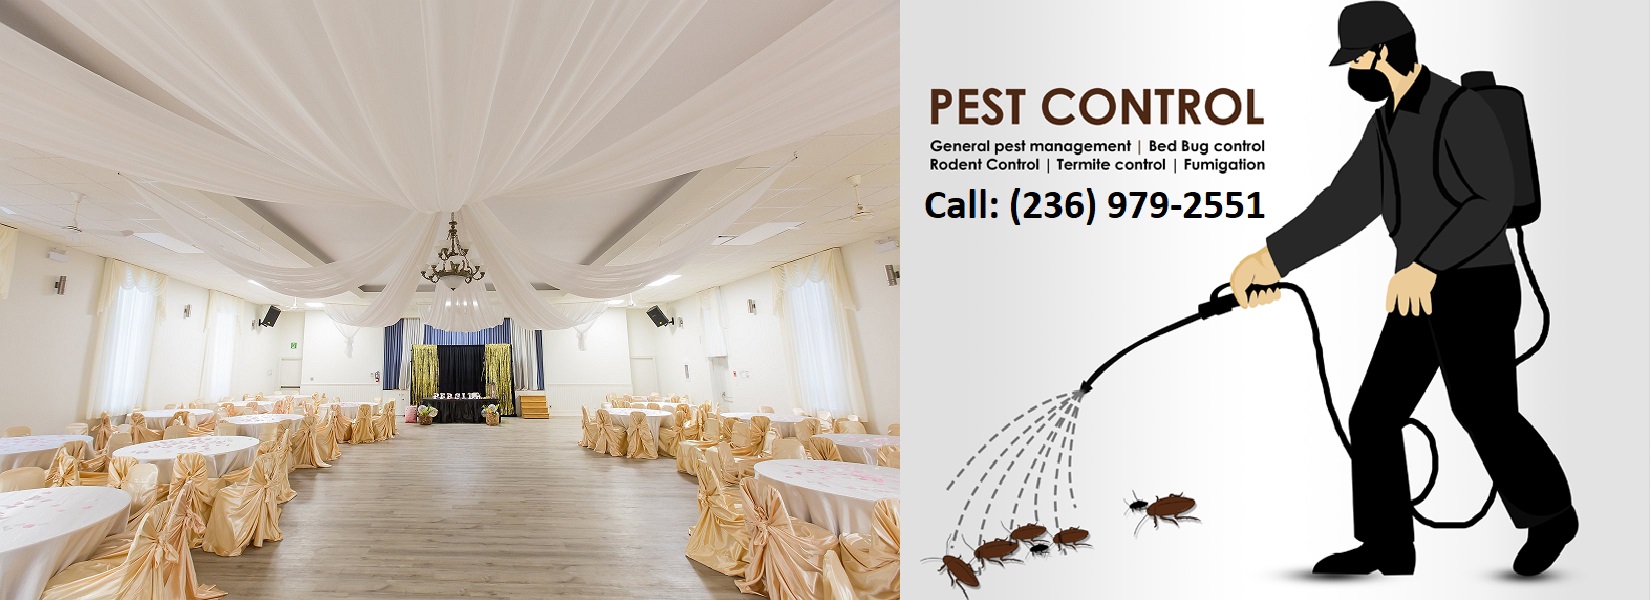 Hotels Pest Removal Services, Hotels Pest Removal Services